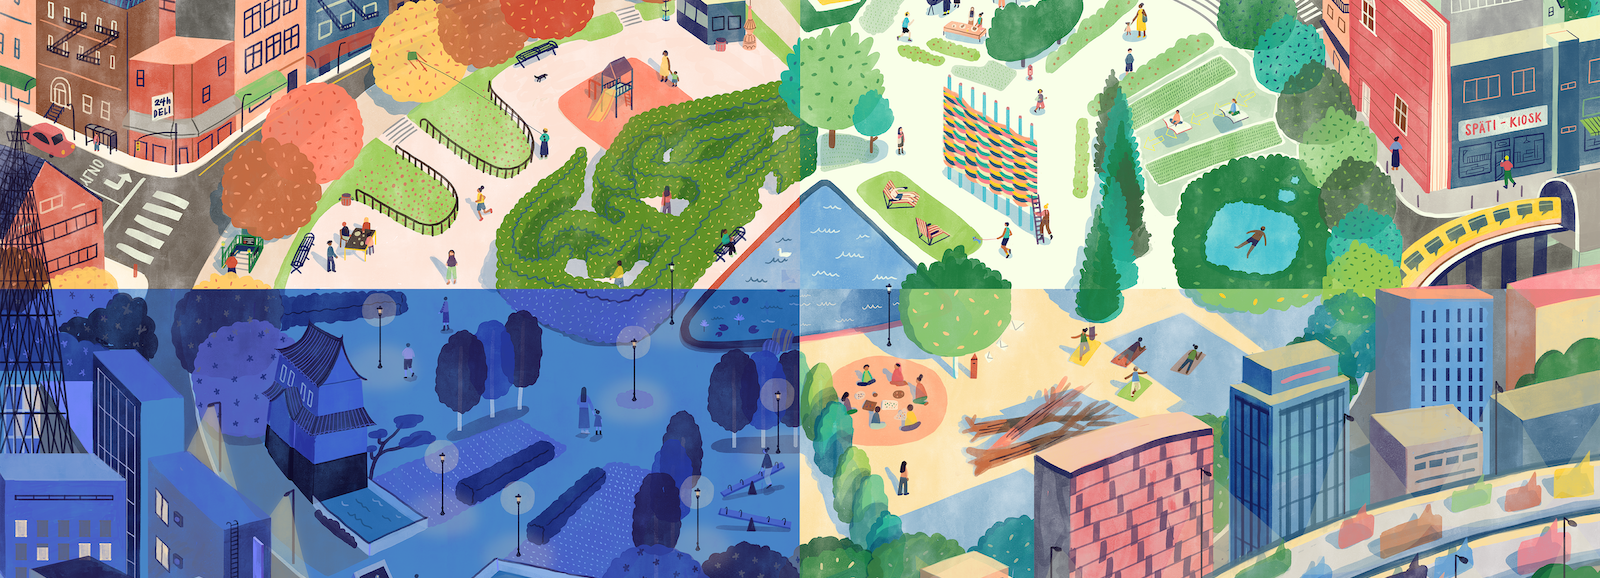 A colourful illustration depicts a friendly community park in the middle of a city. The image is split into four equal sections, each showing the scene during a different season. City buildings line the edges of a large circular park filled with trees, green spaces, ponds, playgrounds and meeting areas. People from all walks of life are using the park to meet friends, go for walks, picnics, yoga, swimming and reading. 